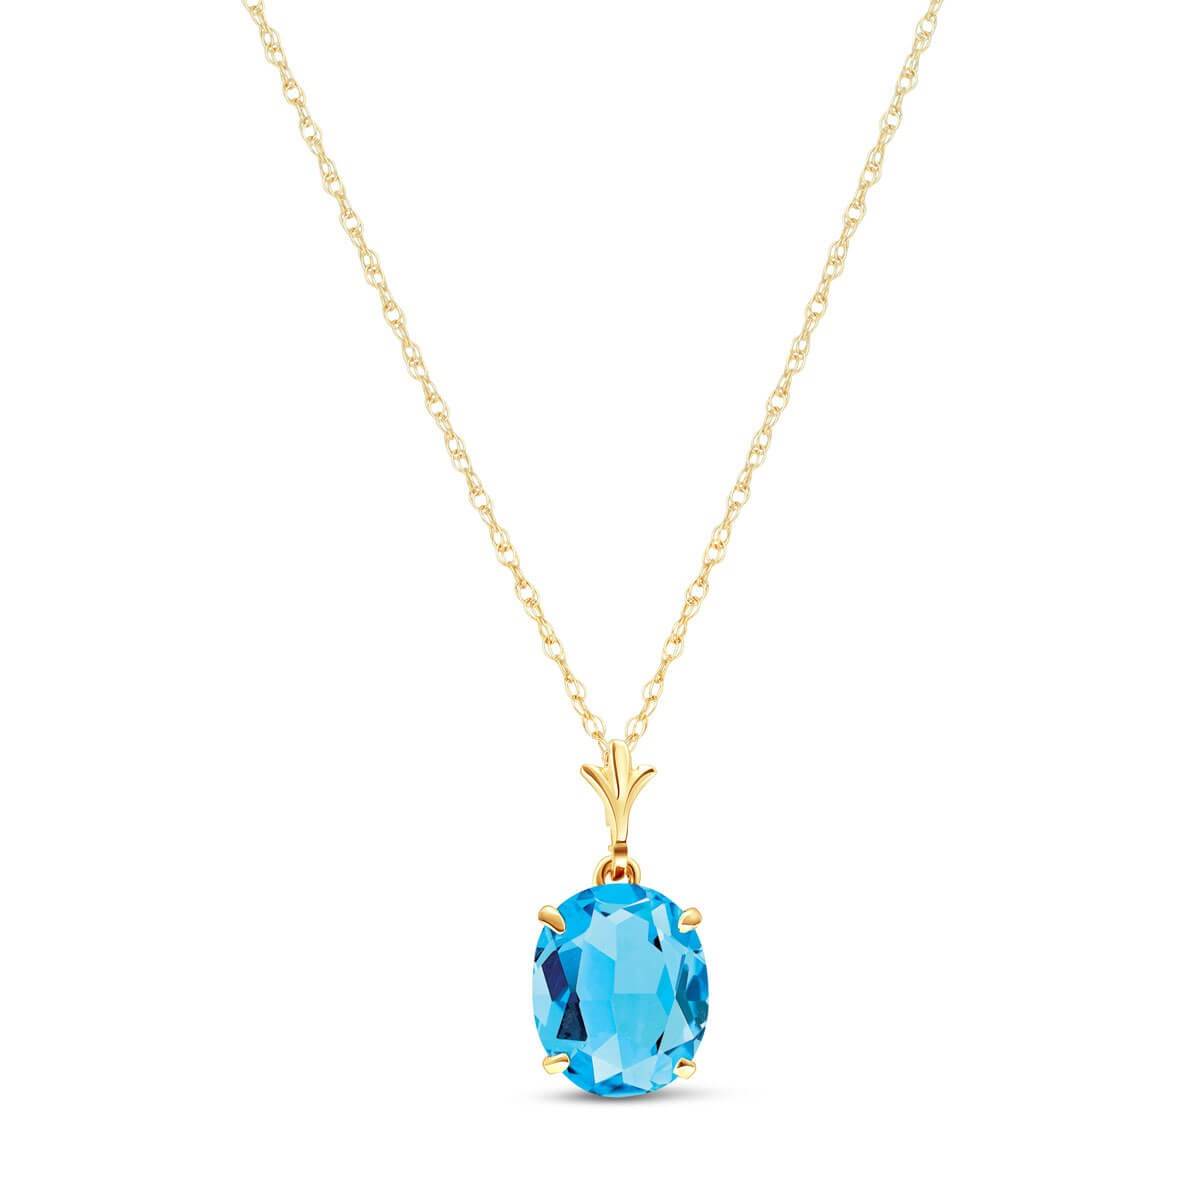 3.12 Carat 14K Solid Yellow Gold Envision Blue Topaz Necklace